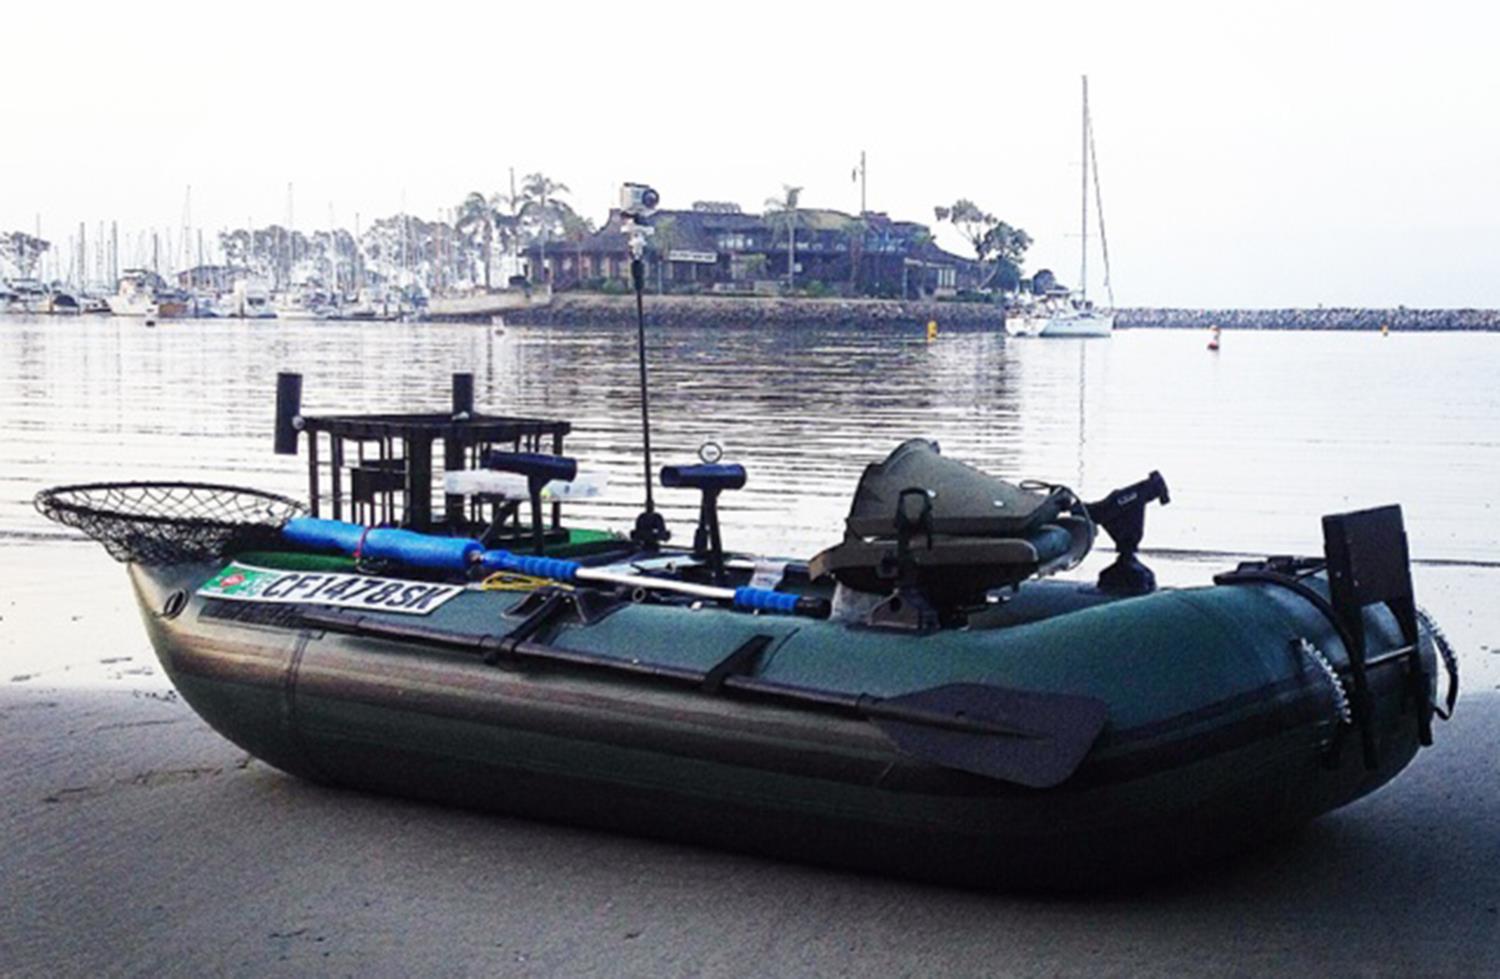 Sea Eagle 285fpb 1 person Inflatable Fishing Boat. Package Prices starting  at $799 plus FREE Shipping